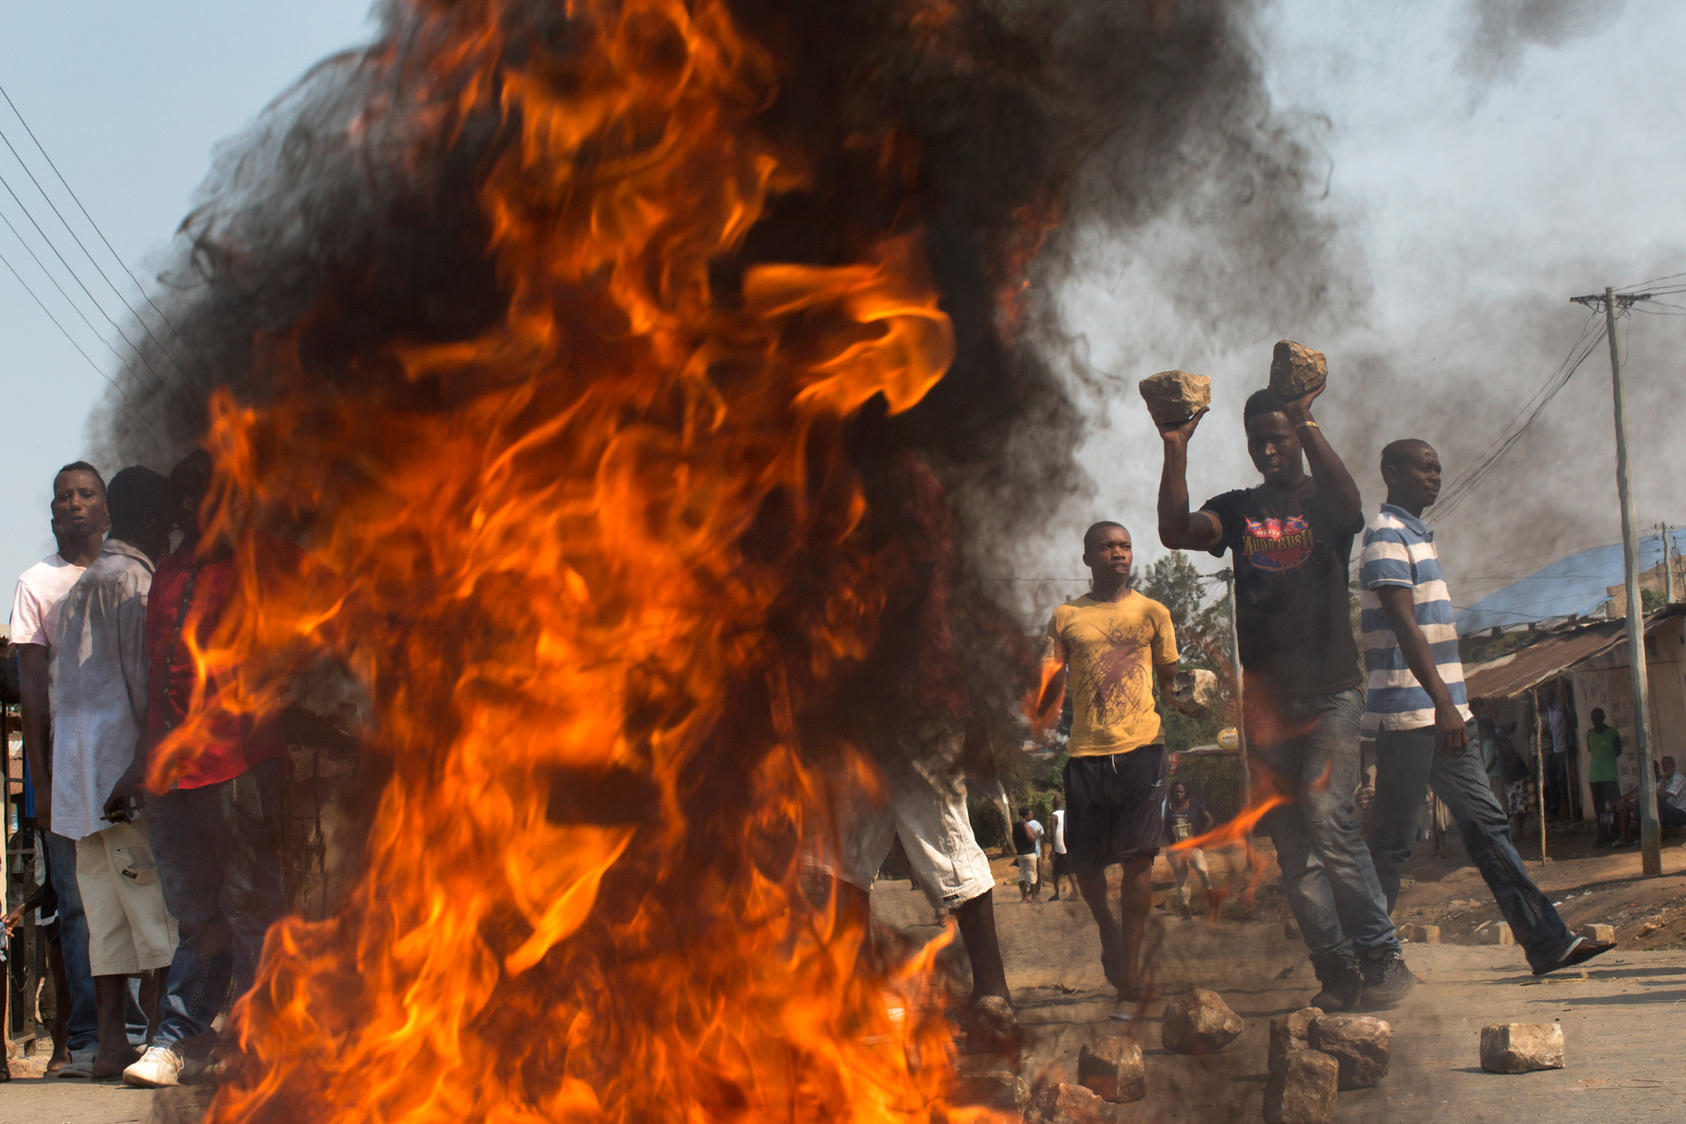 On election day, a crowd sets a fire and uses large cobblestones to make a roadblock in the Nyakabiga neighborhood after the body of an opposition activist was found dead in a ditch, in Bujumbura, Burundi, July 21, 2015. At several polling stations around Bujumbura, the capital, turnout was low Tuesday morning, with voters outnumbered by campaign workers and police officers. (Tyler Hicks/The New York Times) 